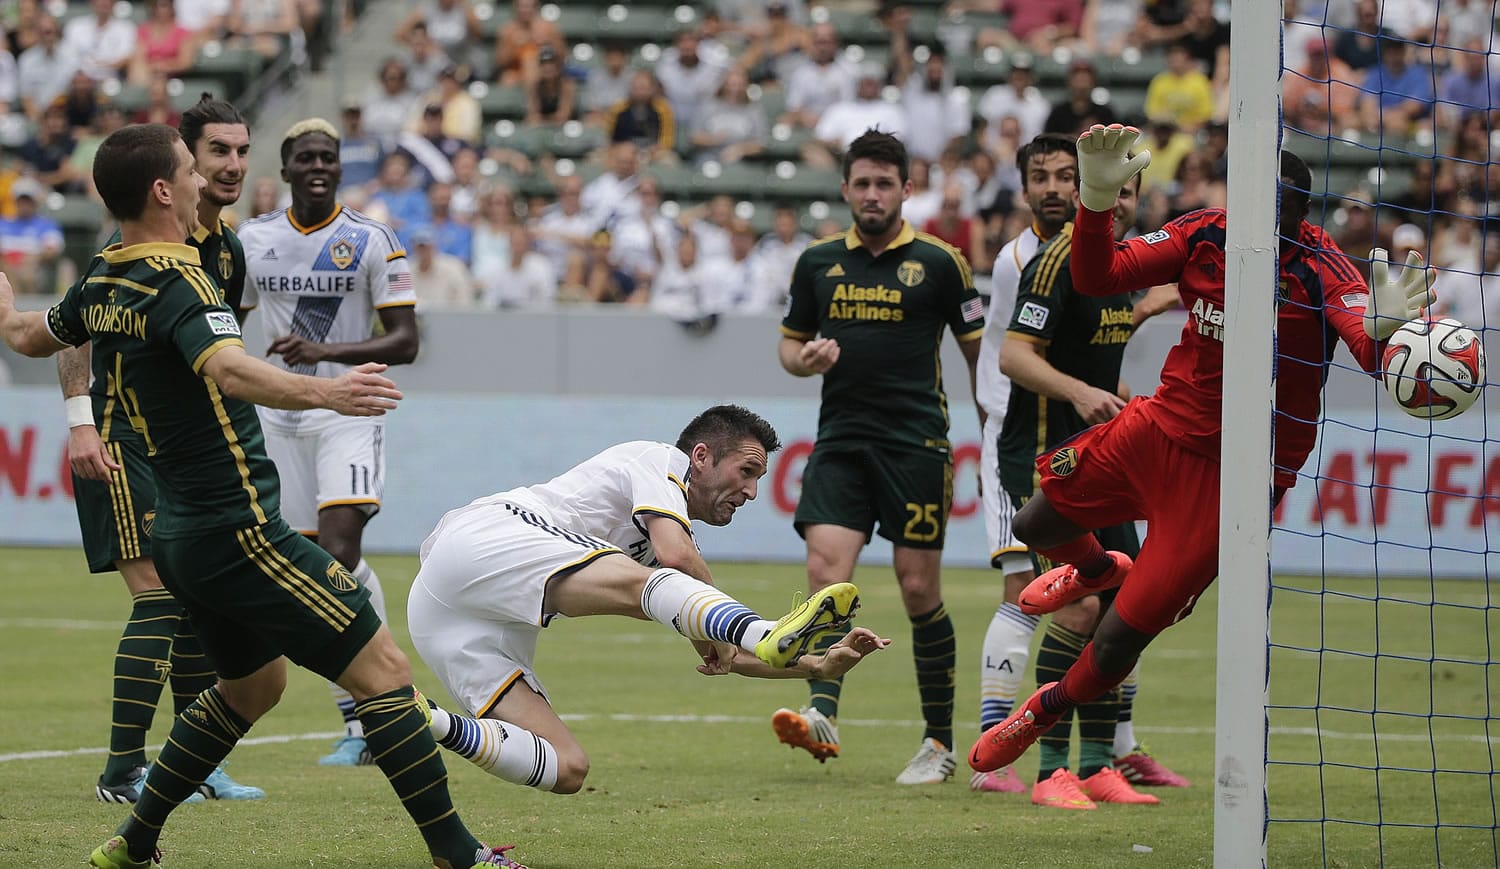 Los Angeles Galaxy's Robbie Keane, center, scores against Portland Timbers goalkeeper Donovan Ricketts during the second half Saturday, Aug. 2, 2014, in Carson, Calif. The Galaxy won 3-1. (AP Photo/Jae C.